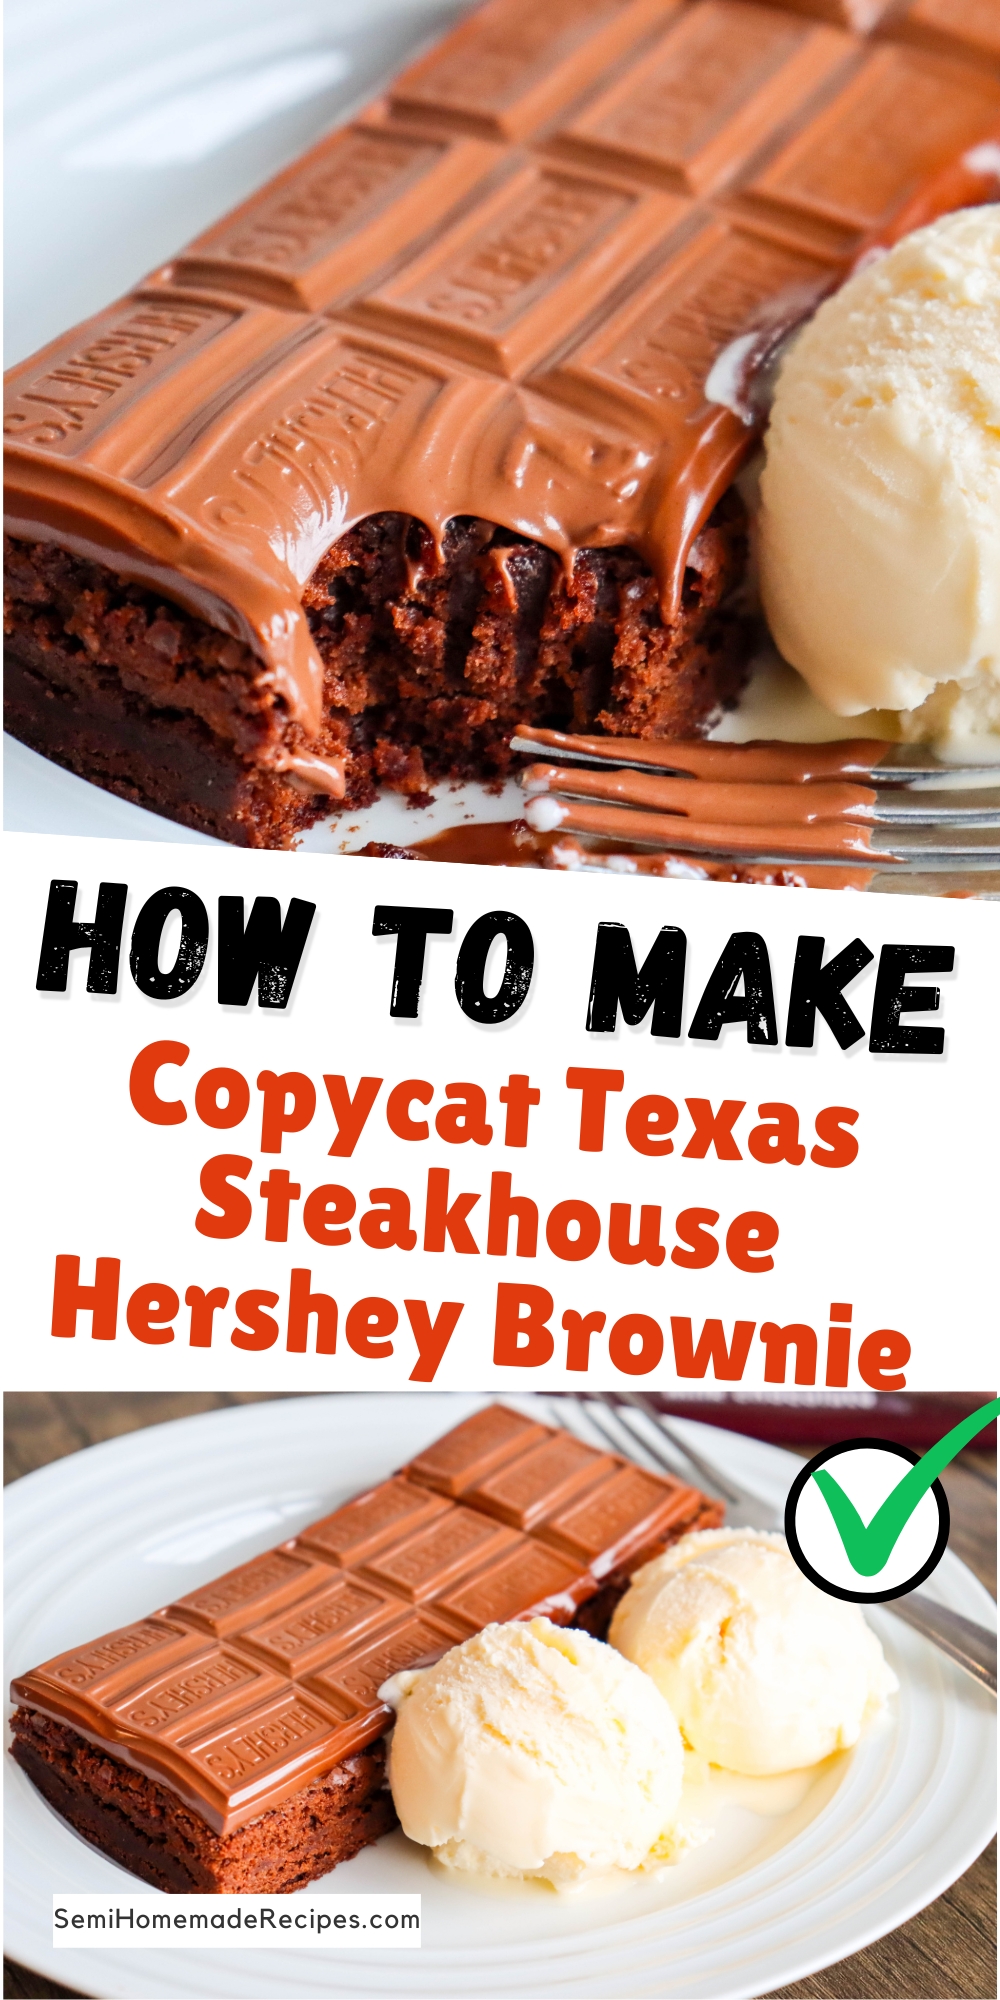 This Copycat Texas Steakhouse Hershey Brownie is a dessert that reminds me of going out to eat when I was a kid! It's a warm brownie with an entire Hershey© chocolate bar melted on top and served with vanilla ice cream!